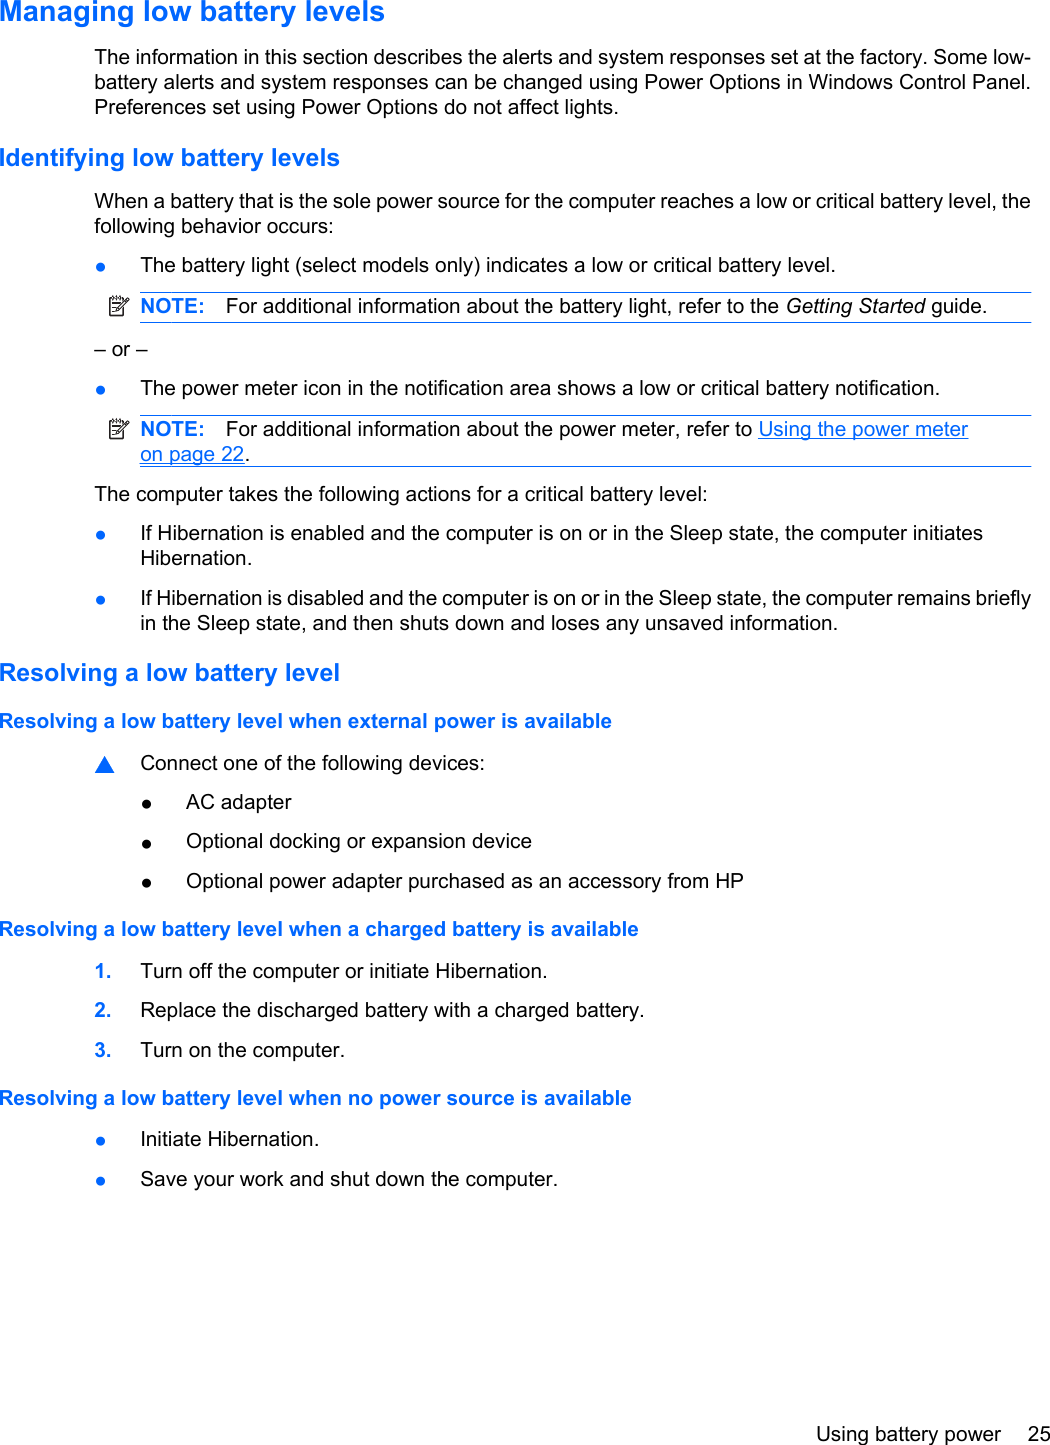 Managing low battery levelsThe information in this section describes the alerts and system responses set at the factory. Some low-battery alerts and system responses can be changed using Power Options in Windows Control Panel.Preferences set using Power Options do not affect lights.Identifying low battery levelsWhen a battery that is the sole power source for the computer reaches a low or critical battery level, thefollowing behavior occurs:●The battery light (select models only) indicates a low or critical battery level.NOTE: For additional information about the battery light, refer to the Getting Started guide.– or –●The power meter icon in the notification area shows a low or critical battery notification.NOTE: For additional information about the power meter, refer to Using the power meteron page 22.The computer takes the following actions for a critical battery level:●If Hibernation is enabled and the computer is on or in the Sleep state, the computer initiatesHibernation.●If Hibernation is disabled and the computer is on or in the Sleep state, the computer remains brieflyin the Sleep state, and then shuts down and loses any unsaved information.Resolving a low battery levelResolving a low battery level when external power is available▲Connect one of the following devices:●AC adapter●Optional docking or expansion device●Optional power adapter purchased as an accessory from HPResolving a low battery level when a charged battery is available1. Turn off the computer or initiate Hibernation.2. Replace the discharged battery with a charged battery.3. Turn on the computer.Resolving a low battery level when no power source is available●Initiate Hibernation.●Save your work and shut down the computer.Using battery power 25